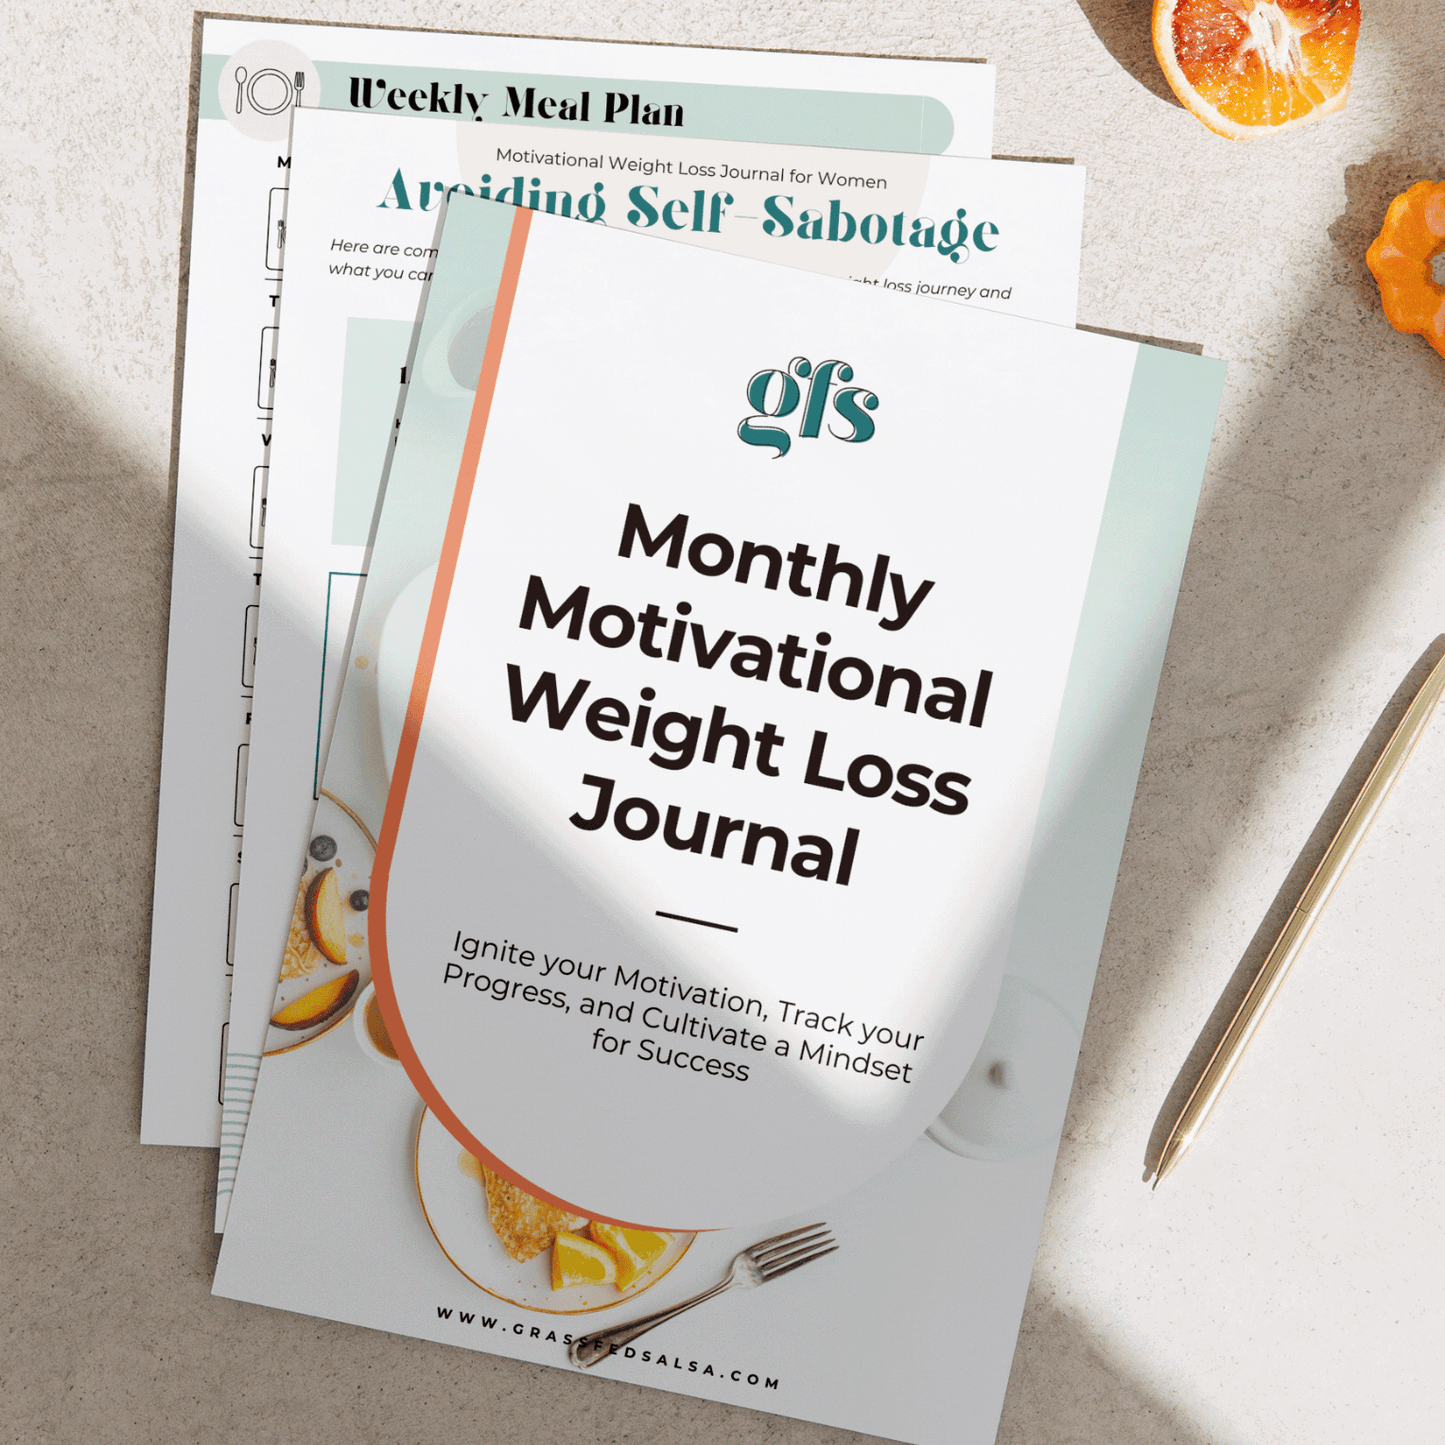 Monthly Motivational Weight Loss Journal